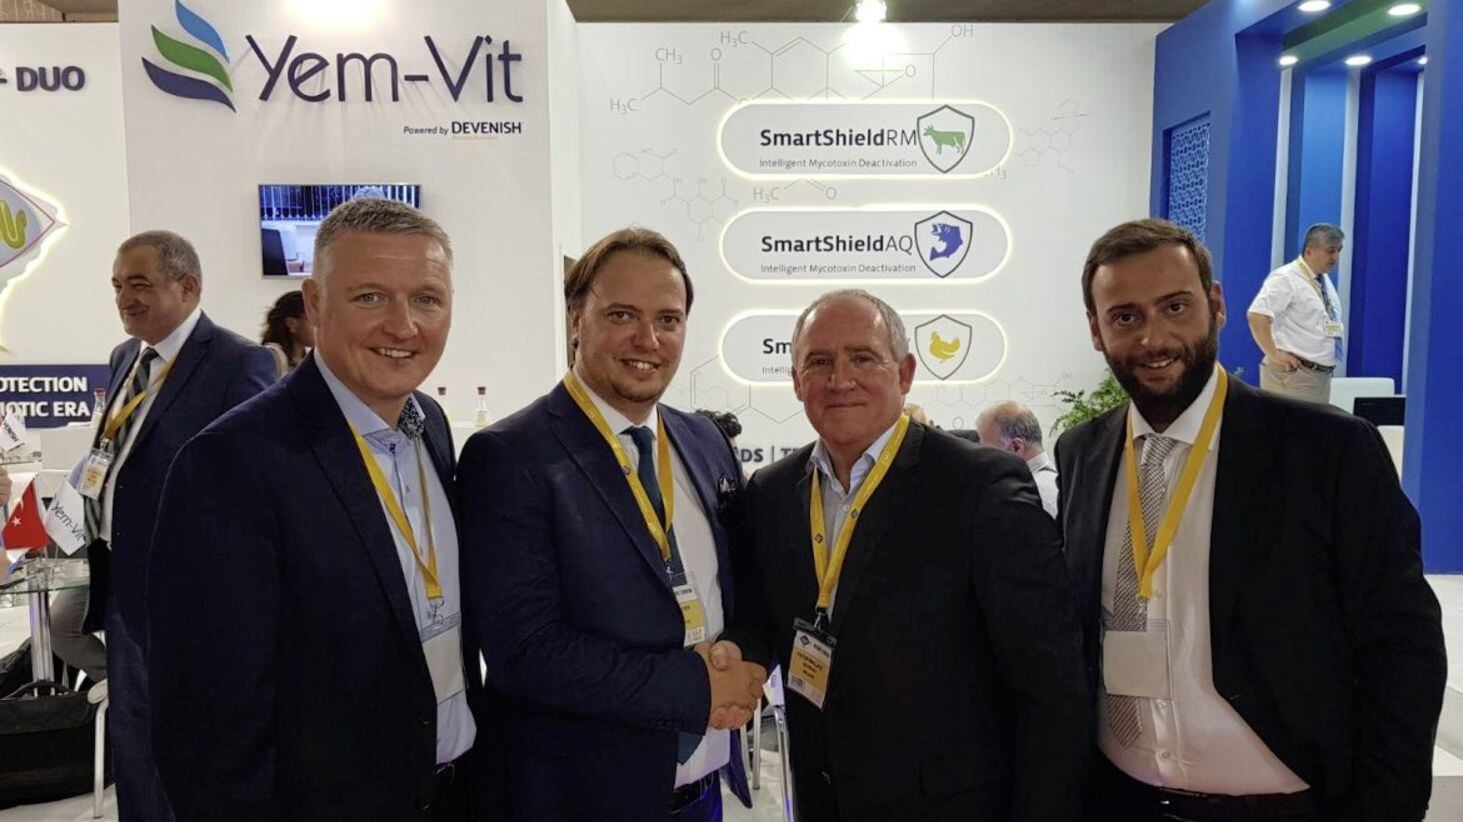 Patrick McLaughlin, chief operating officer Devenish Group, Onat Onater, shareholder and general manager, Yem-Vit, Peter Wallace, executive vice chairman, Devenish Group and Onur Onater, shareholder and vice general manager, Yem-Vit. The two firms have announced a new partnership 